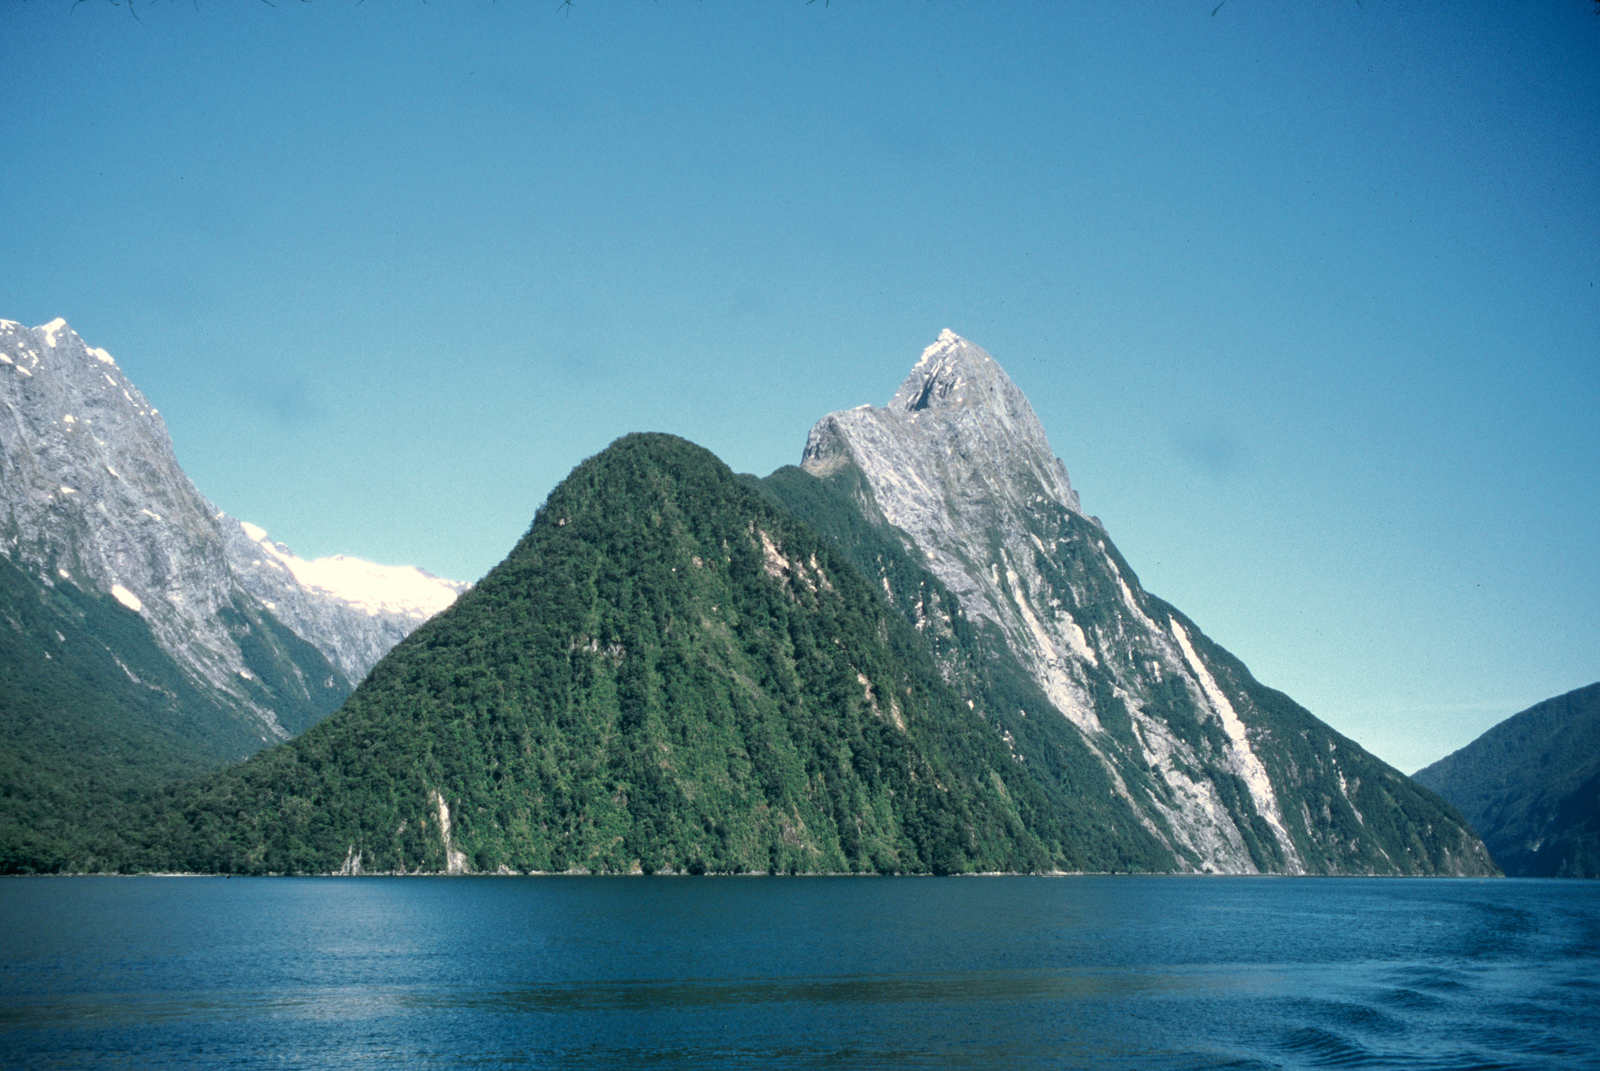 Mitre Peak rises out of Milford Sound near the end of the Milford Track.